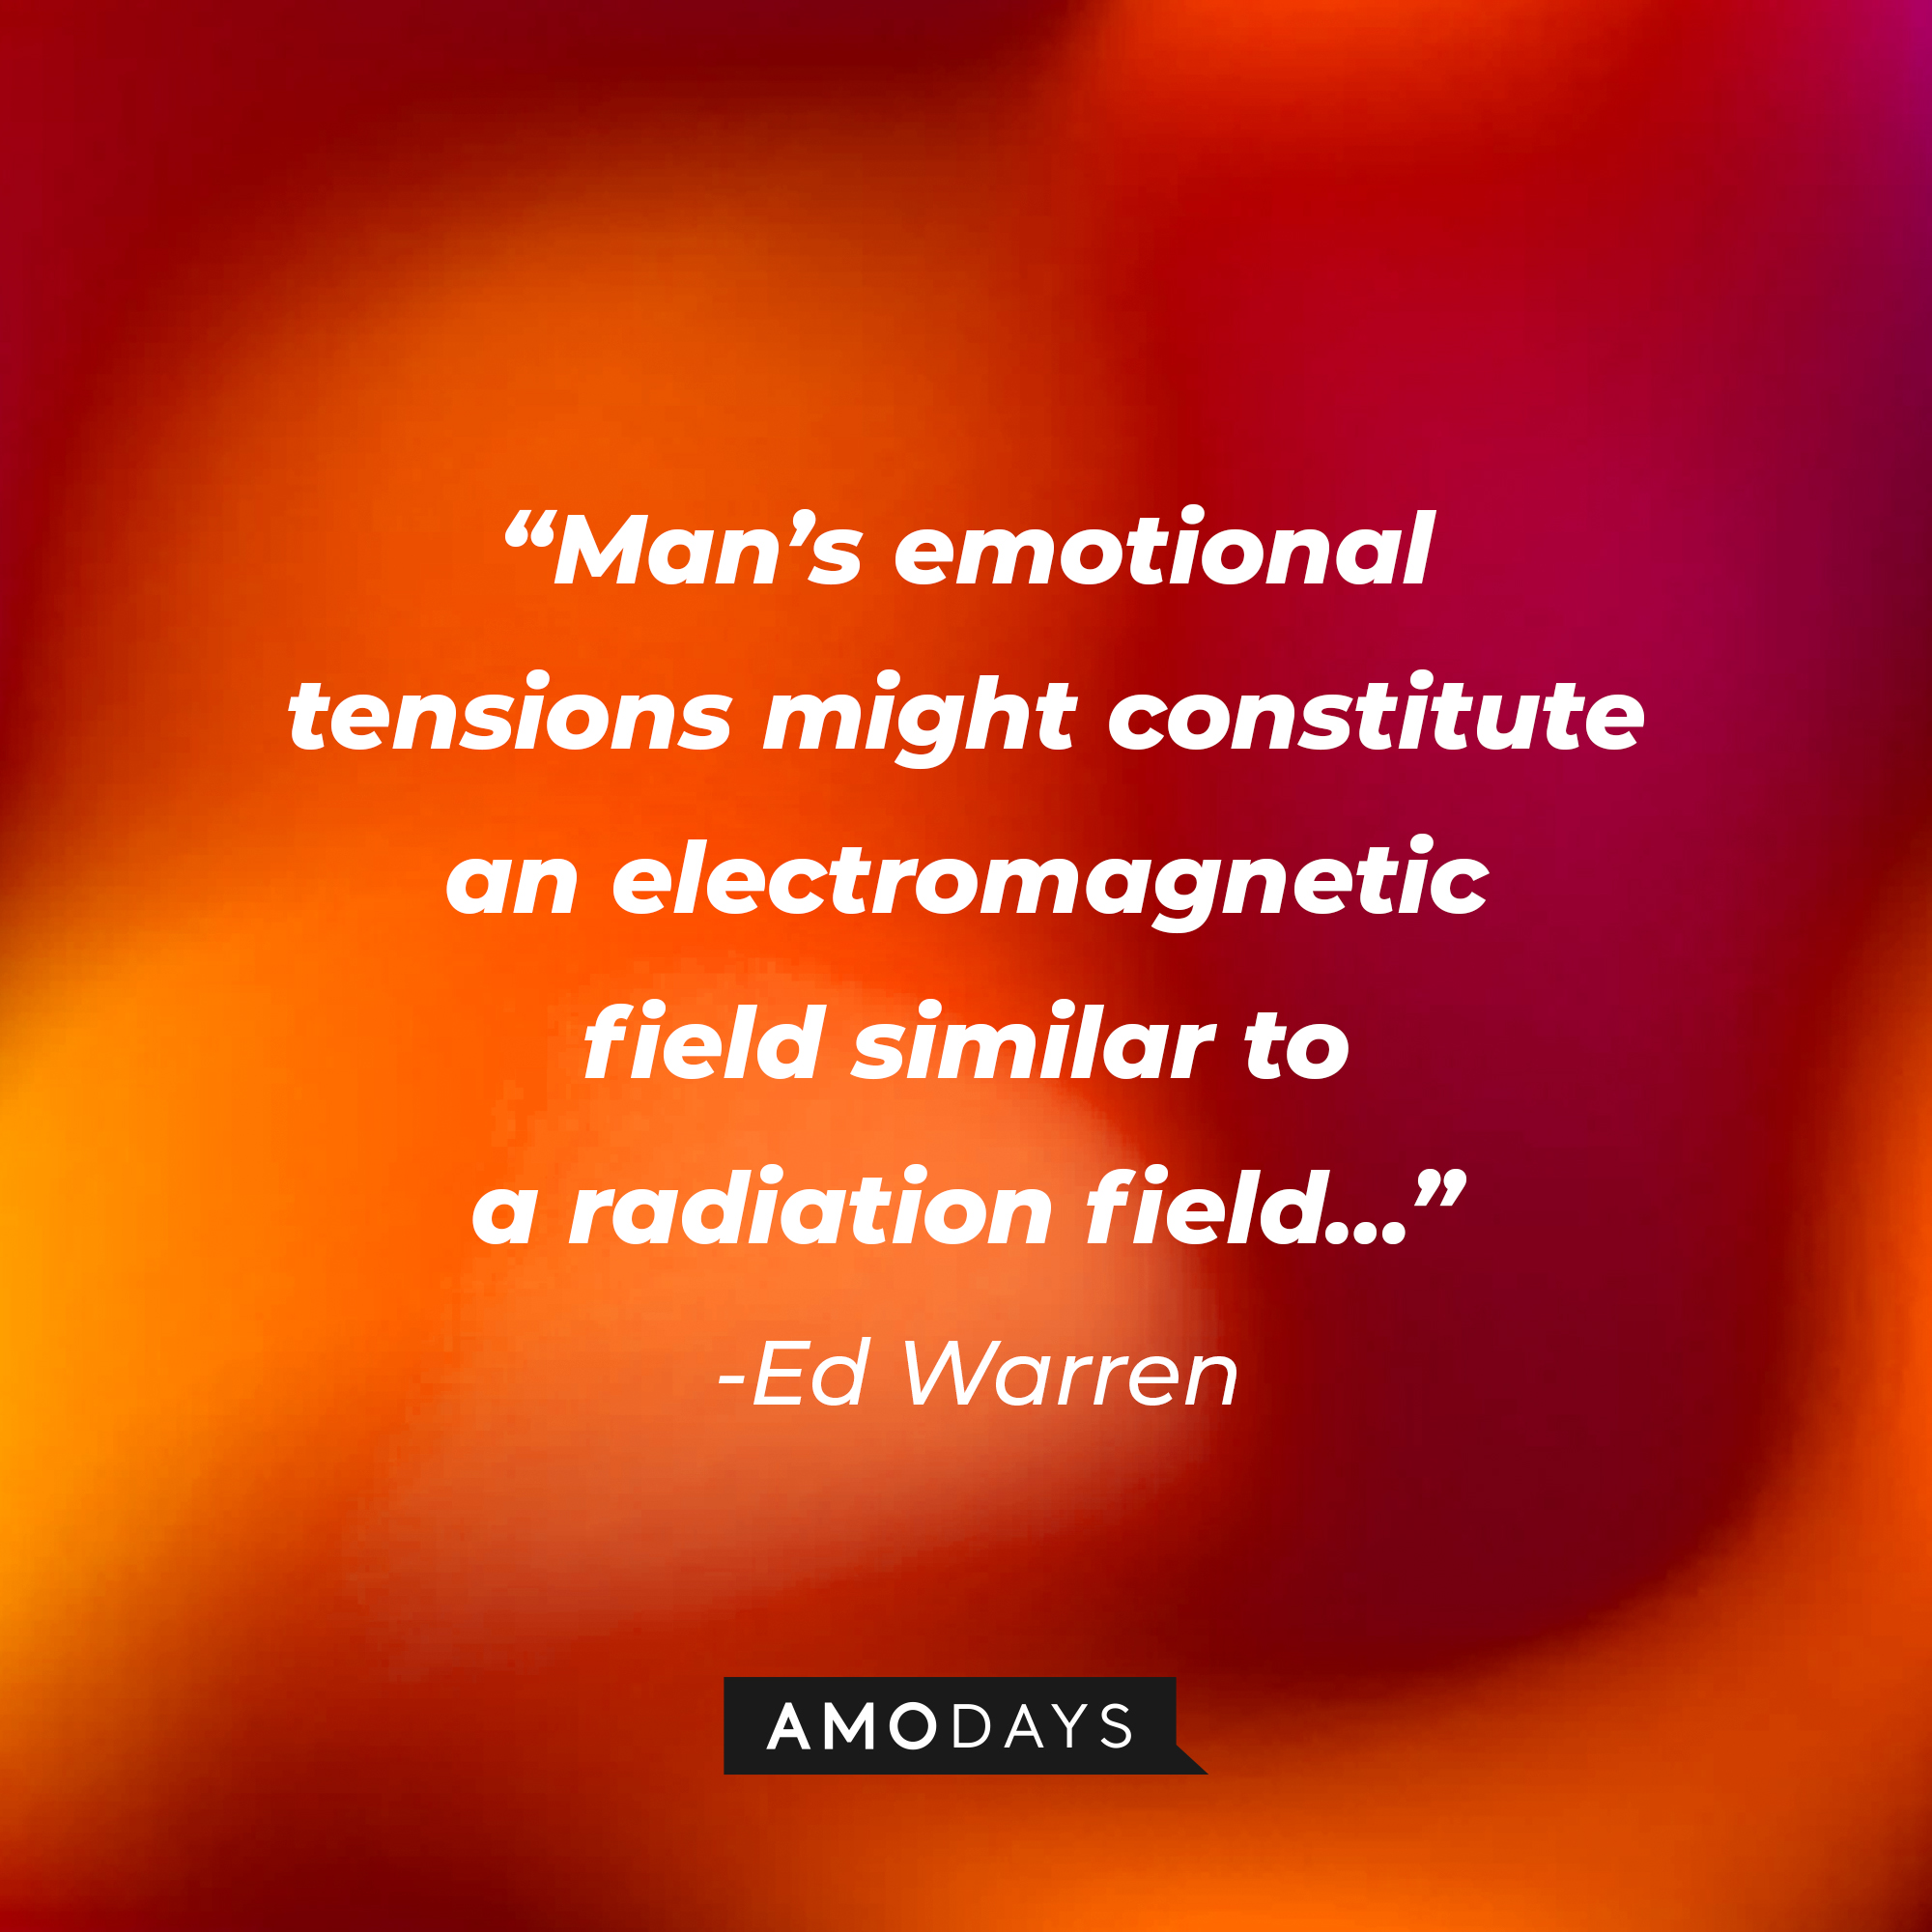 Ed Warren’s quote: “Man’s emotional tensions might constitute an electromagnetic field similar to a radiation field…”  | Source: AmoDays